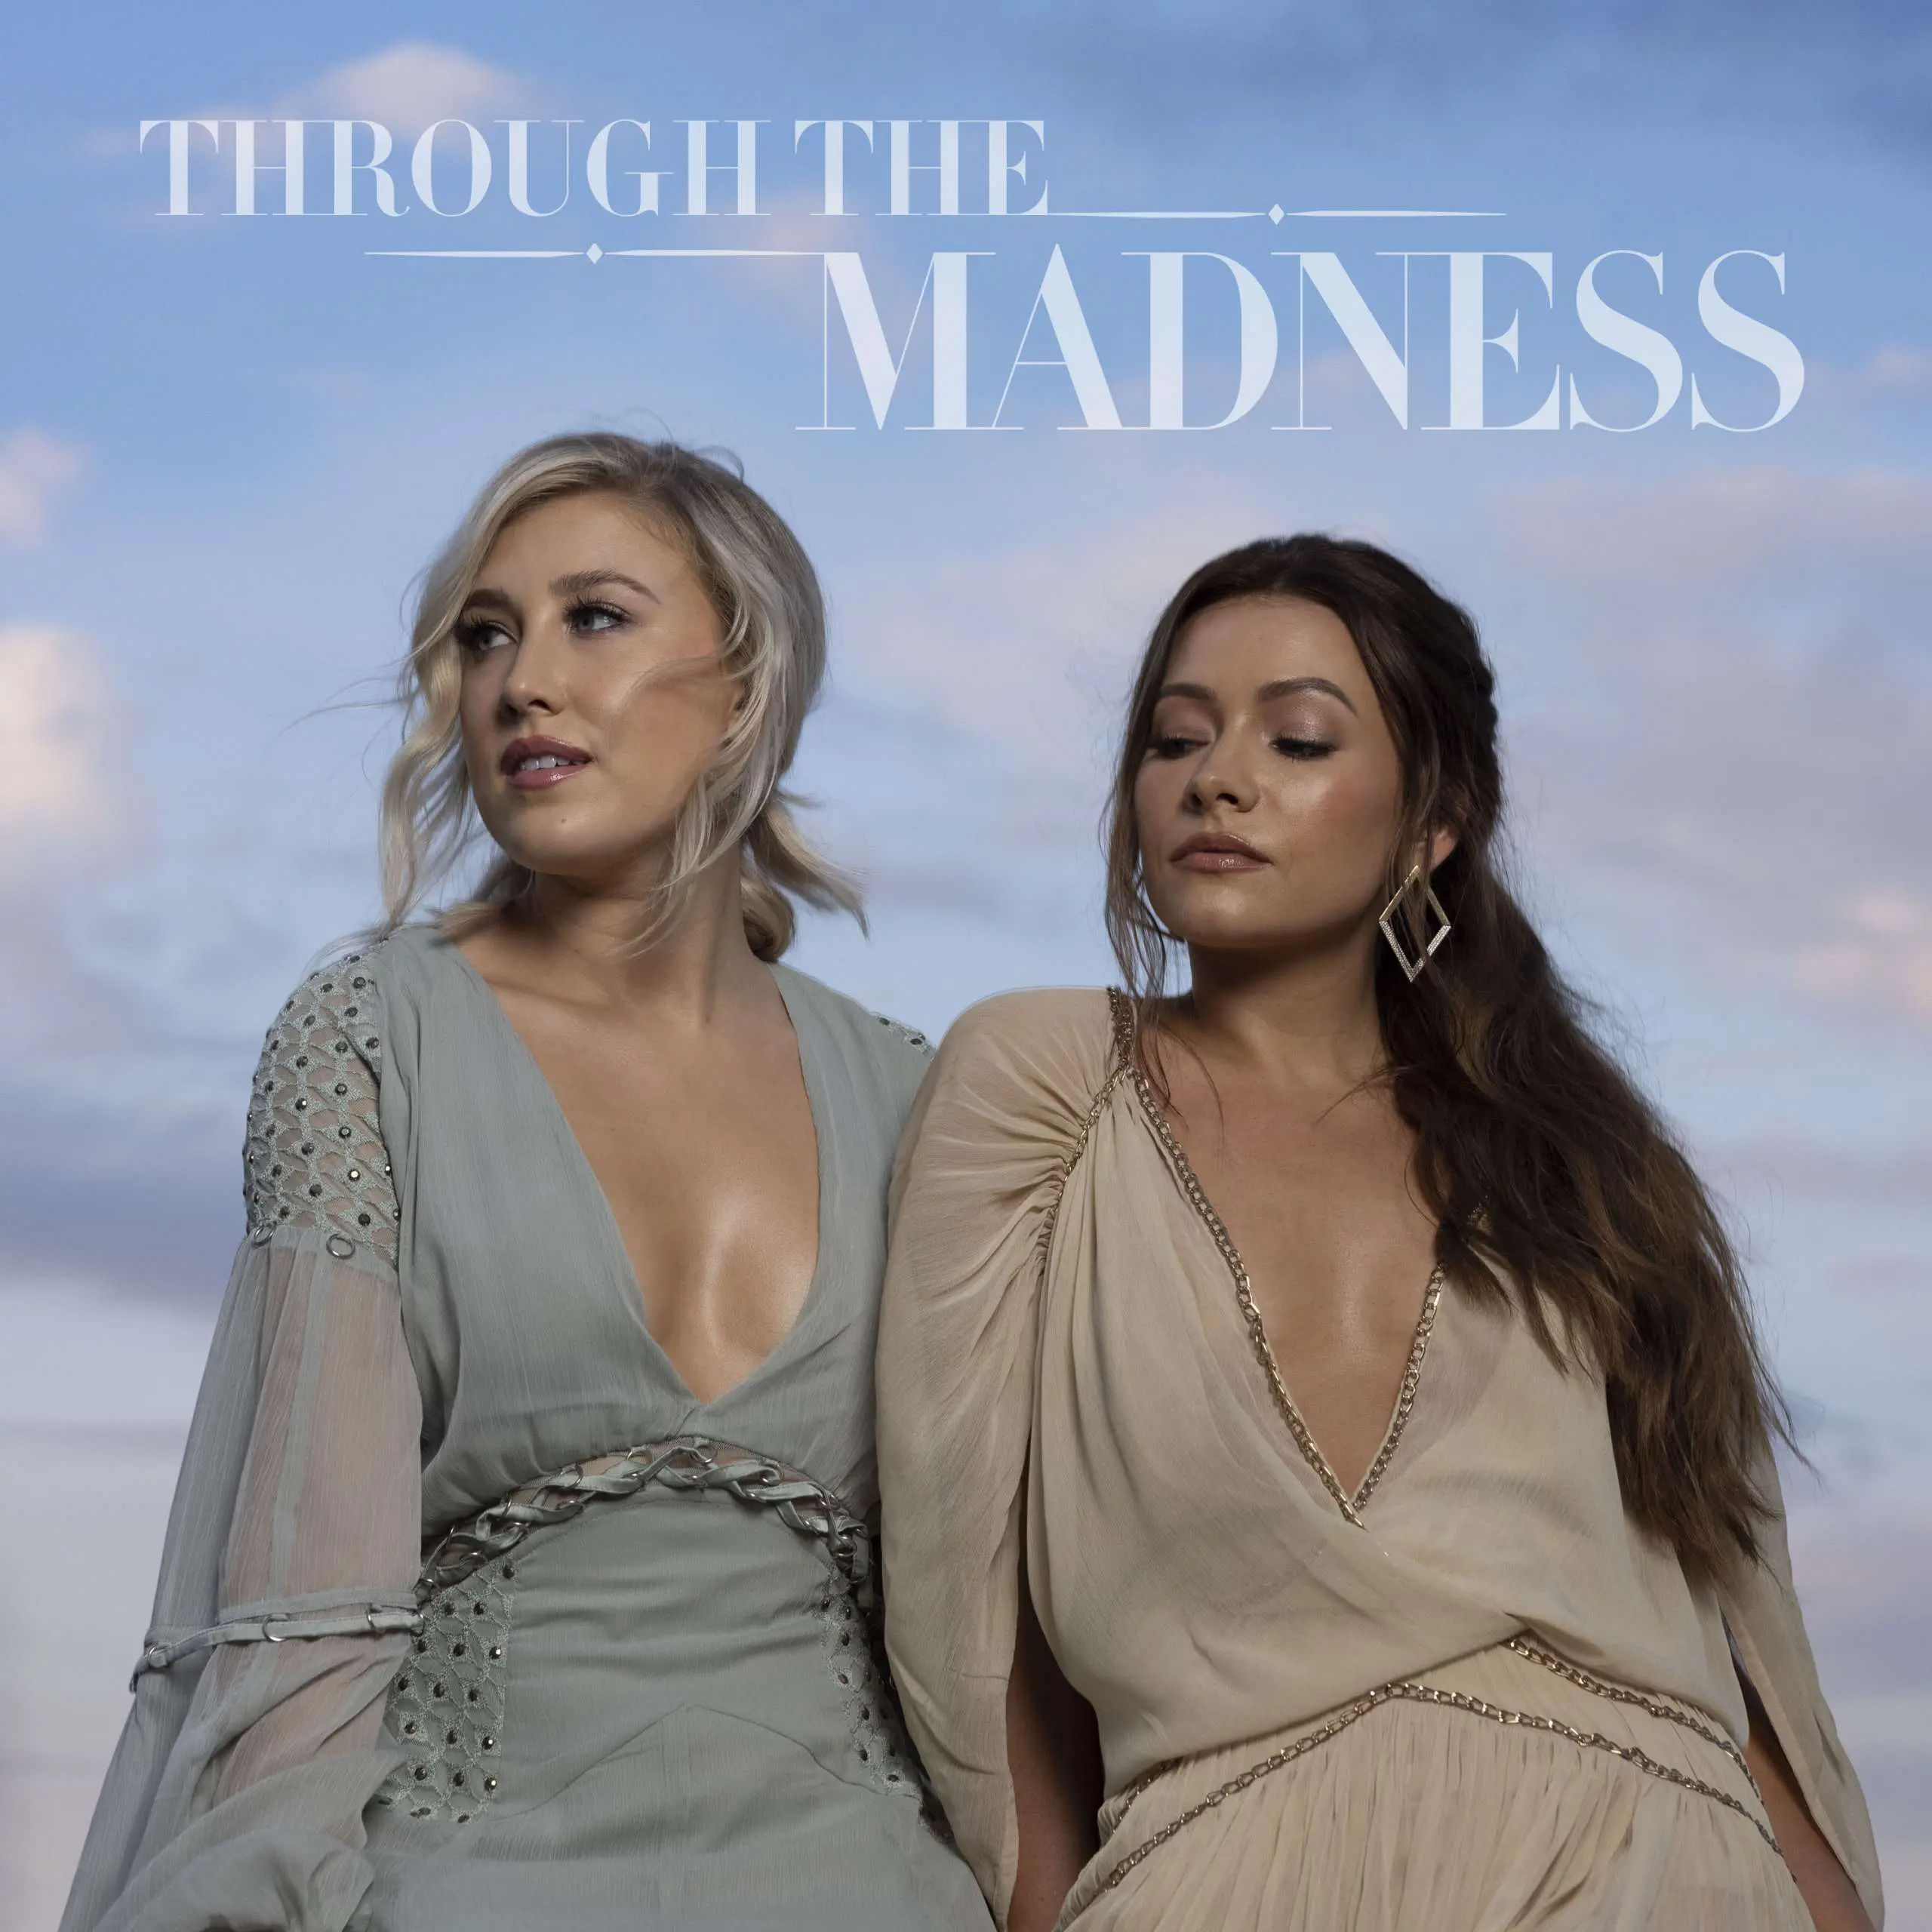 Maddie & Tae's Through The Madness Vol. 1 Out Today